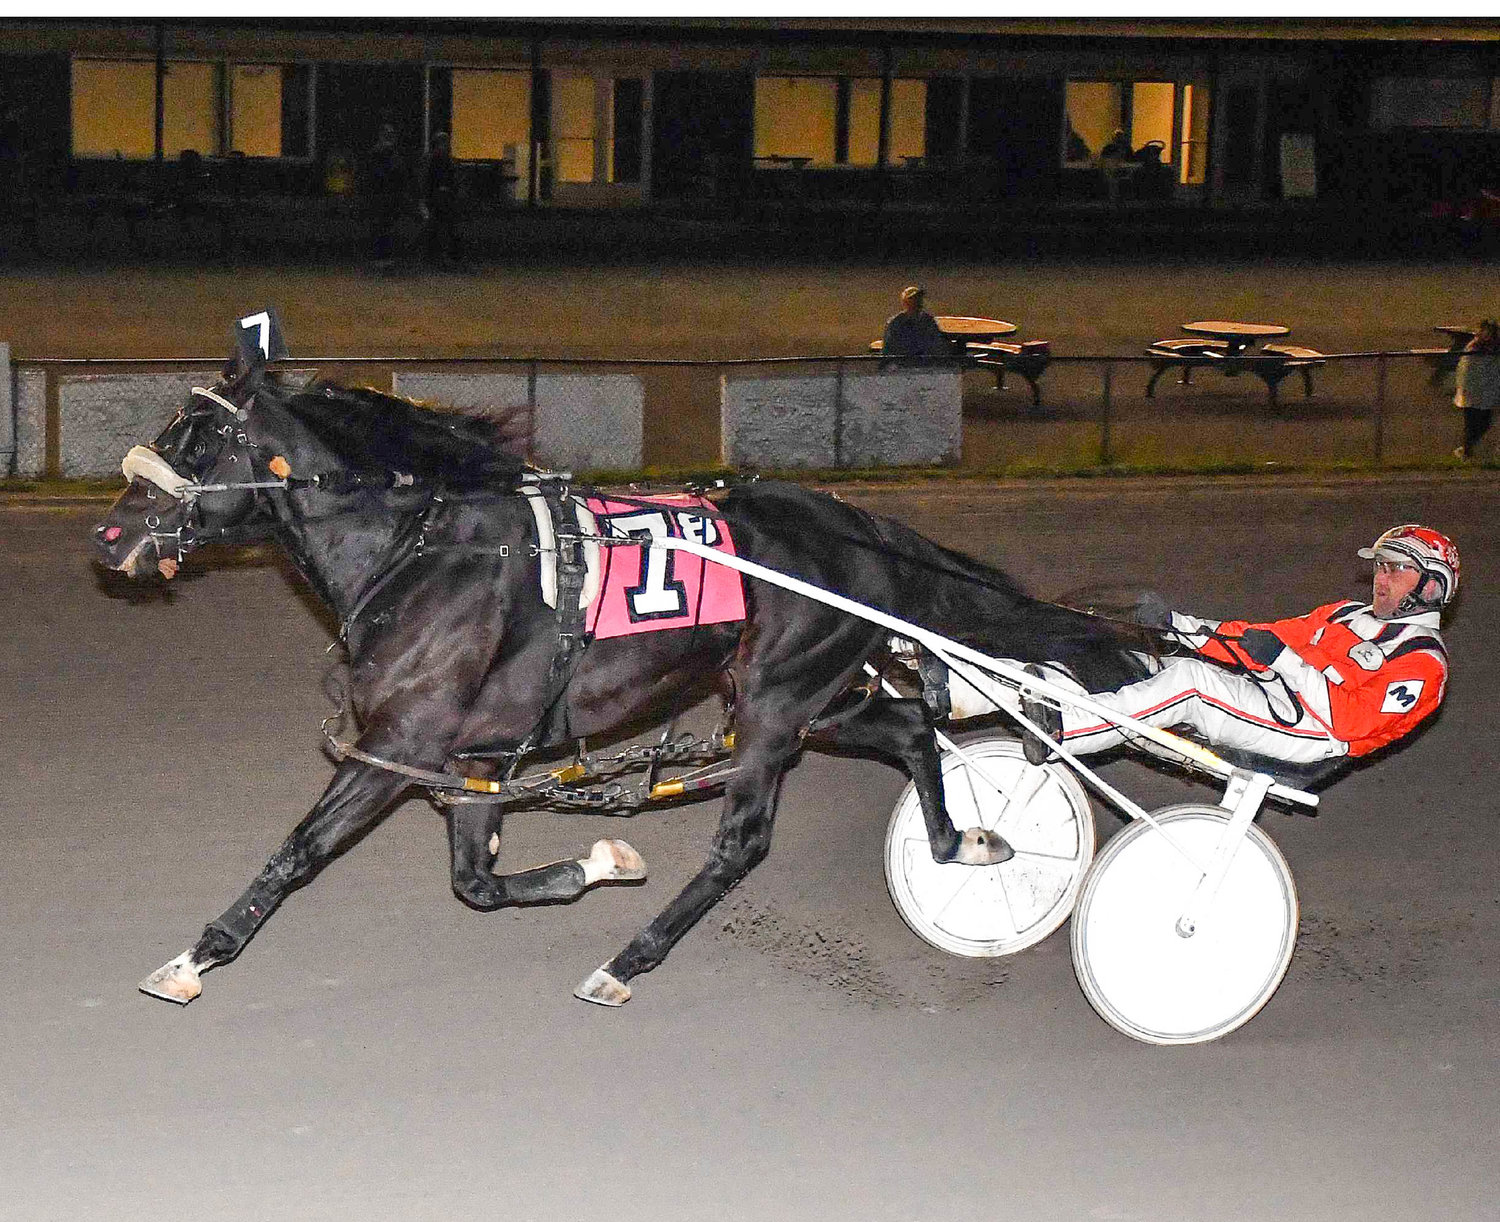 Natameri and driver John MacDonald won the featured $10,000 Open 1 Pace at Vernon Downs on Saturday in the horse's lifetime best of 1:49.4. It was the eighth win in 10 starts this season for the 4-year-old gelding.